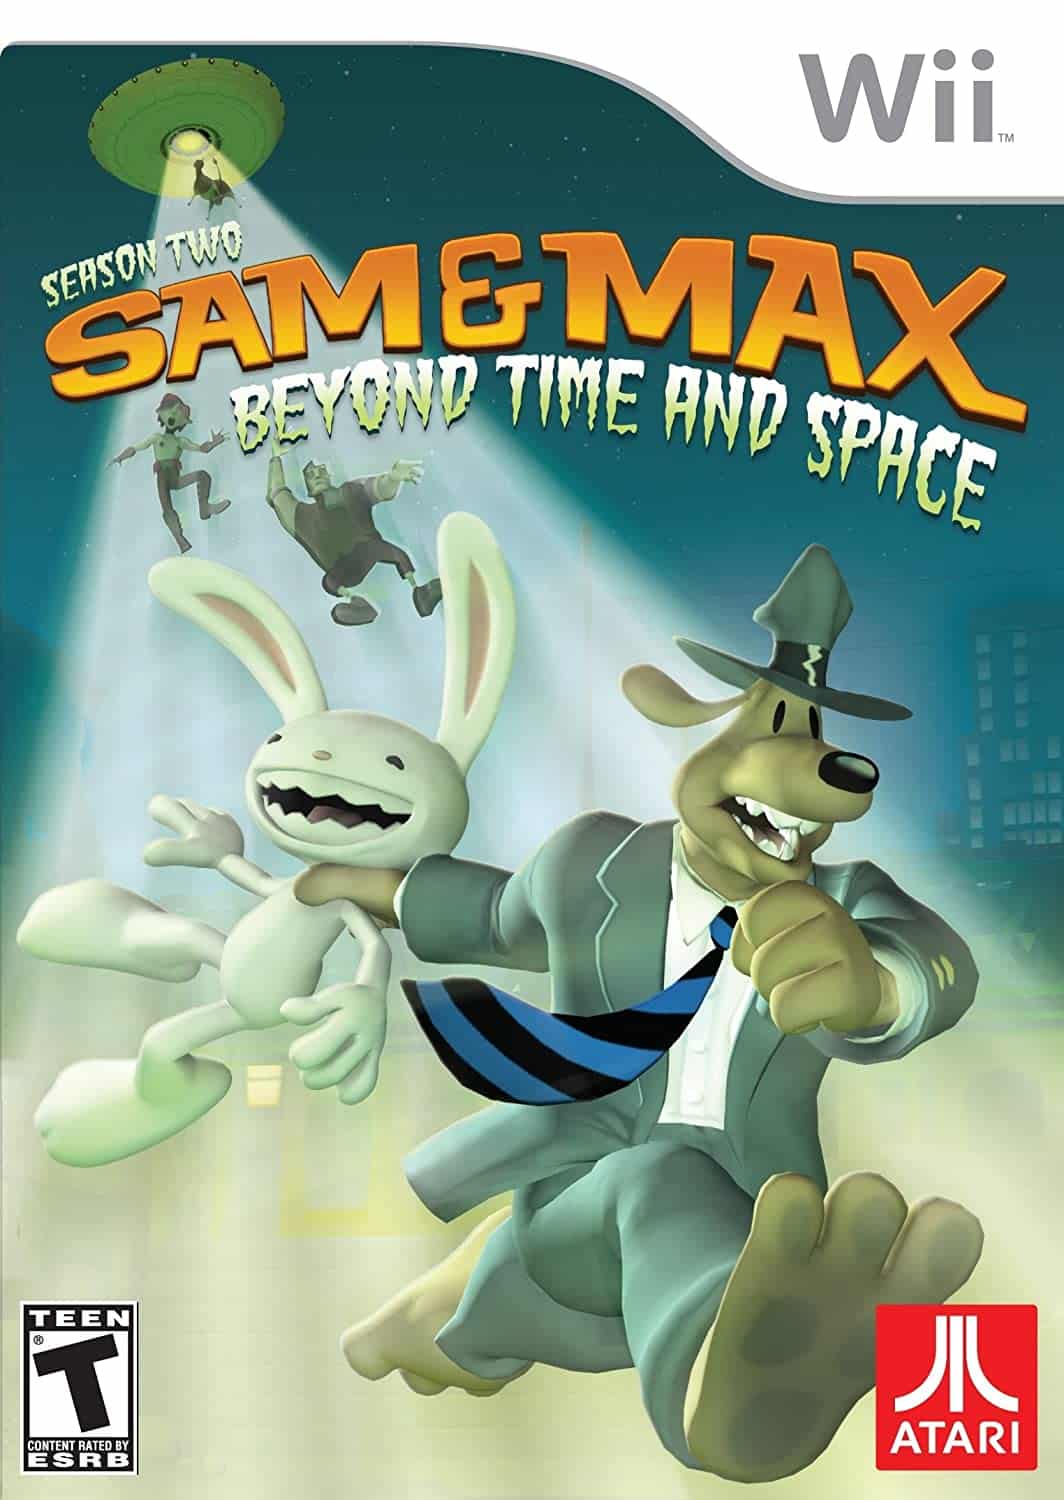 Sam & Max Beyond Time and Space player count stats